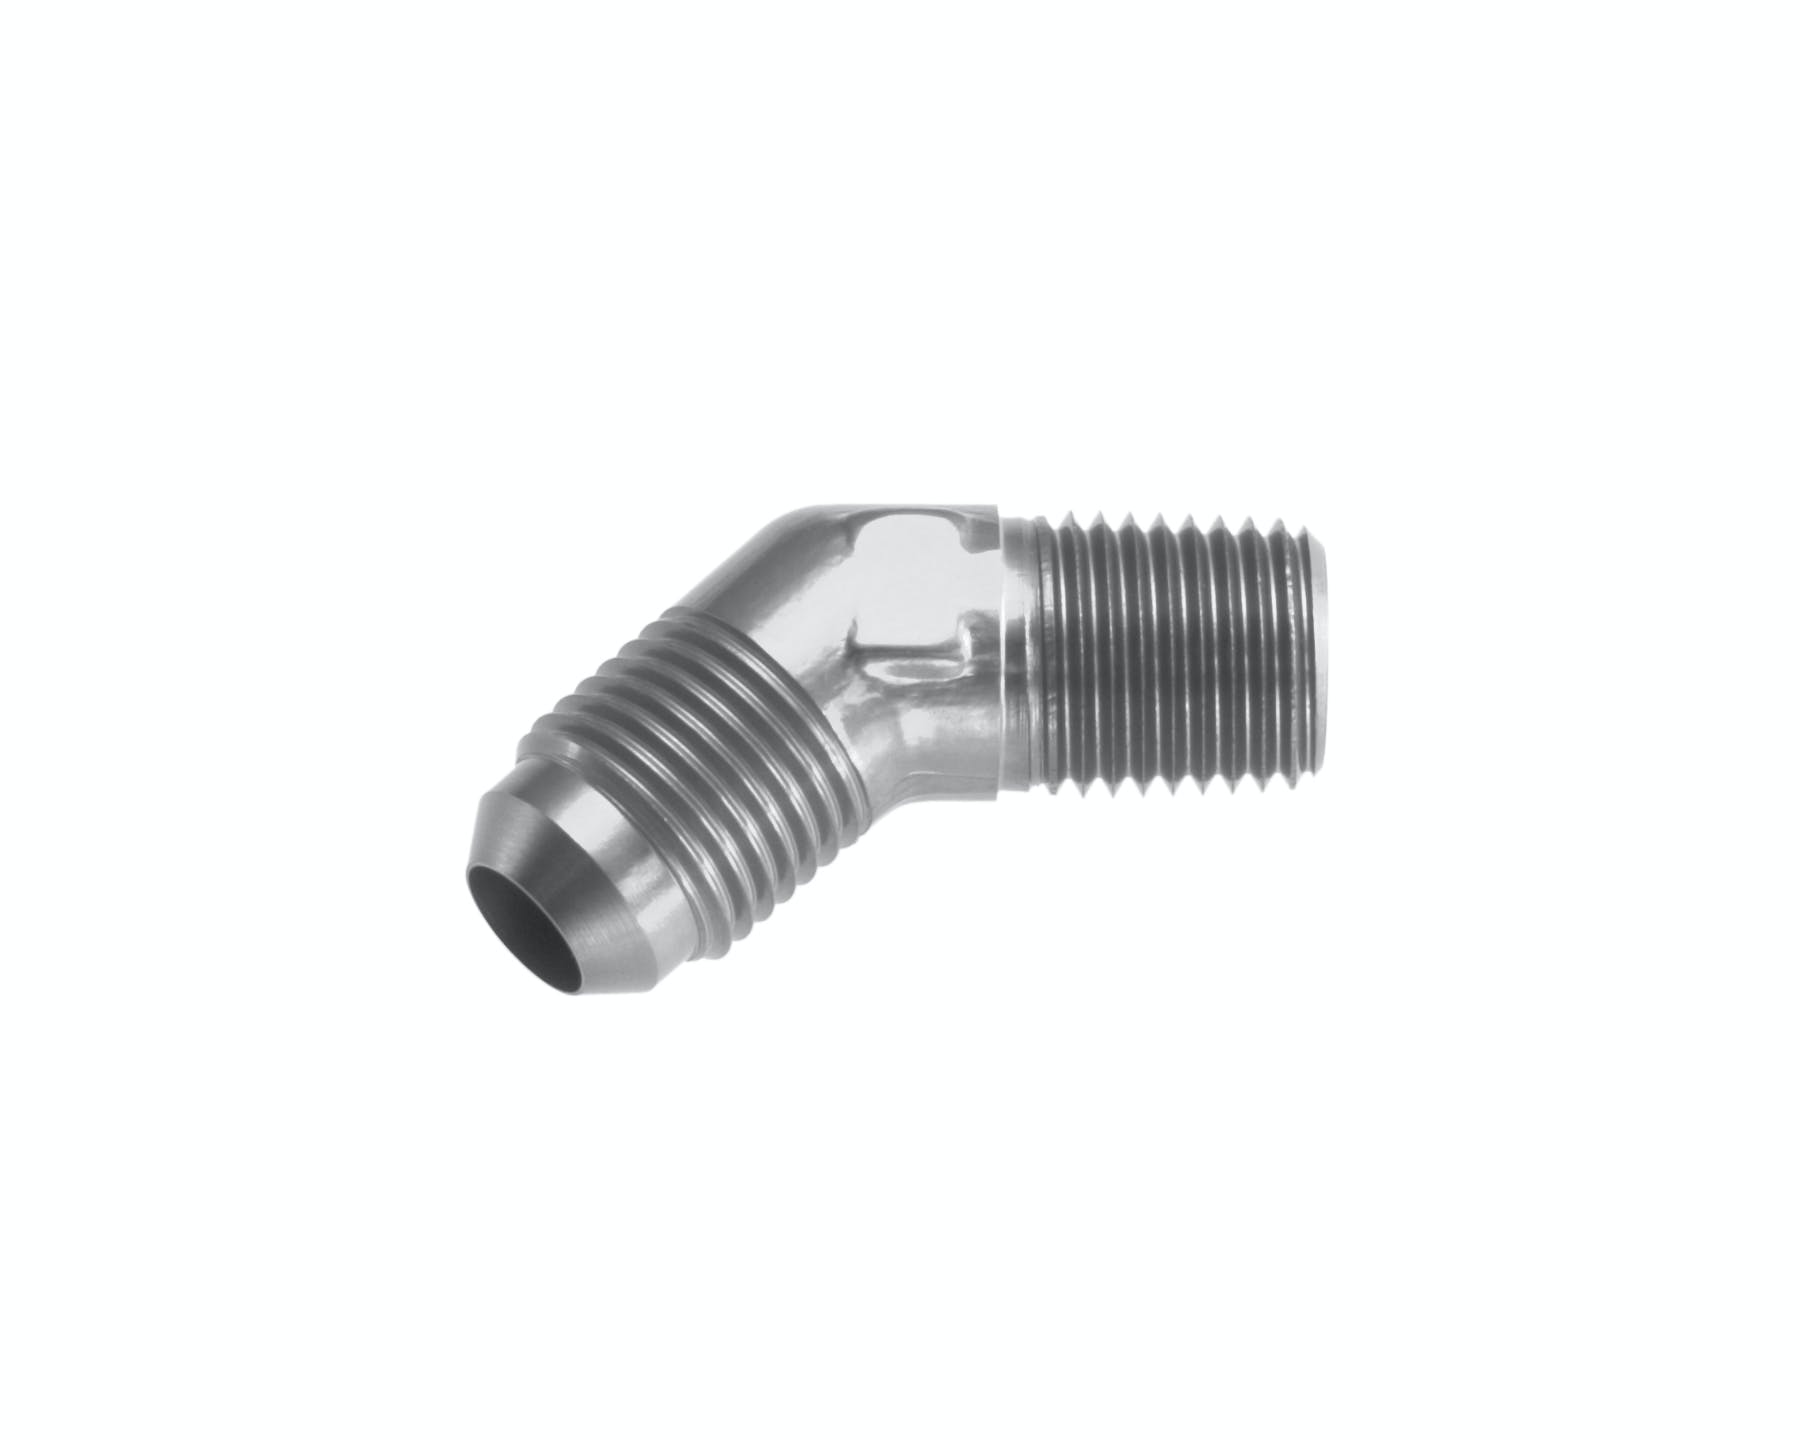 Redhorse Performance 823-12-12-5 -12 45 degree Male adapter to -12 (3/4in) NPT Male - clear